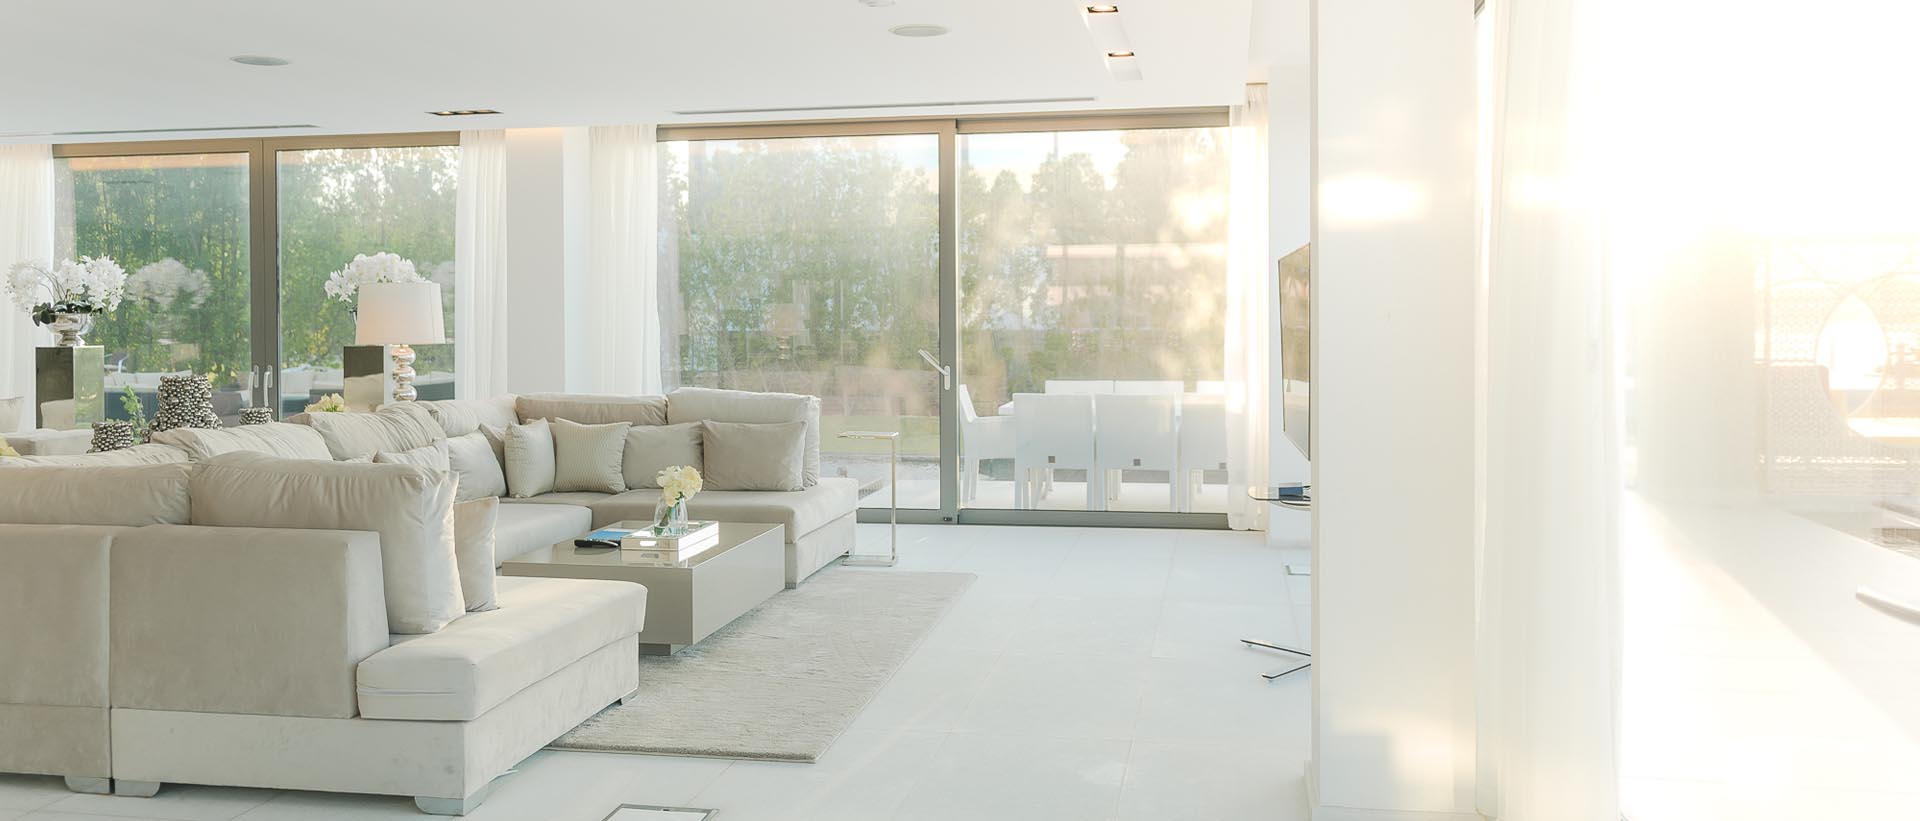 10,000 SQUARE FEET OF LIGHT-FILLED LIVING SPACE